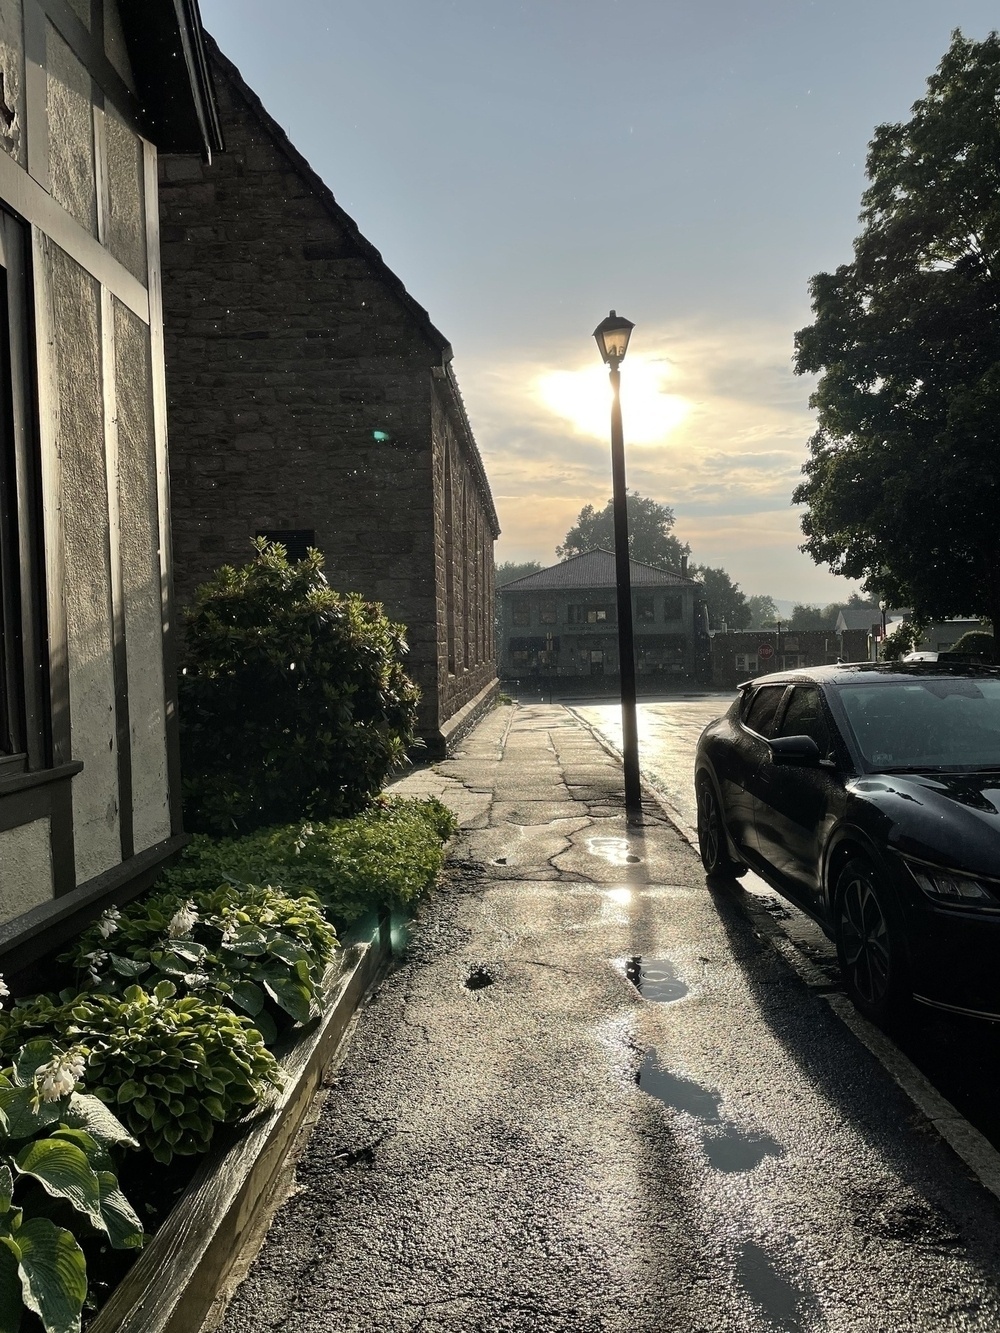 Sidewalk with rain, sun, lamppost, and parked car